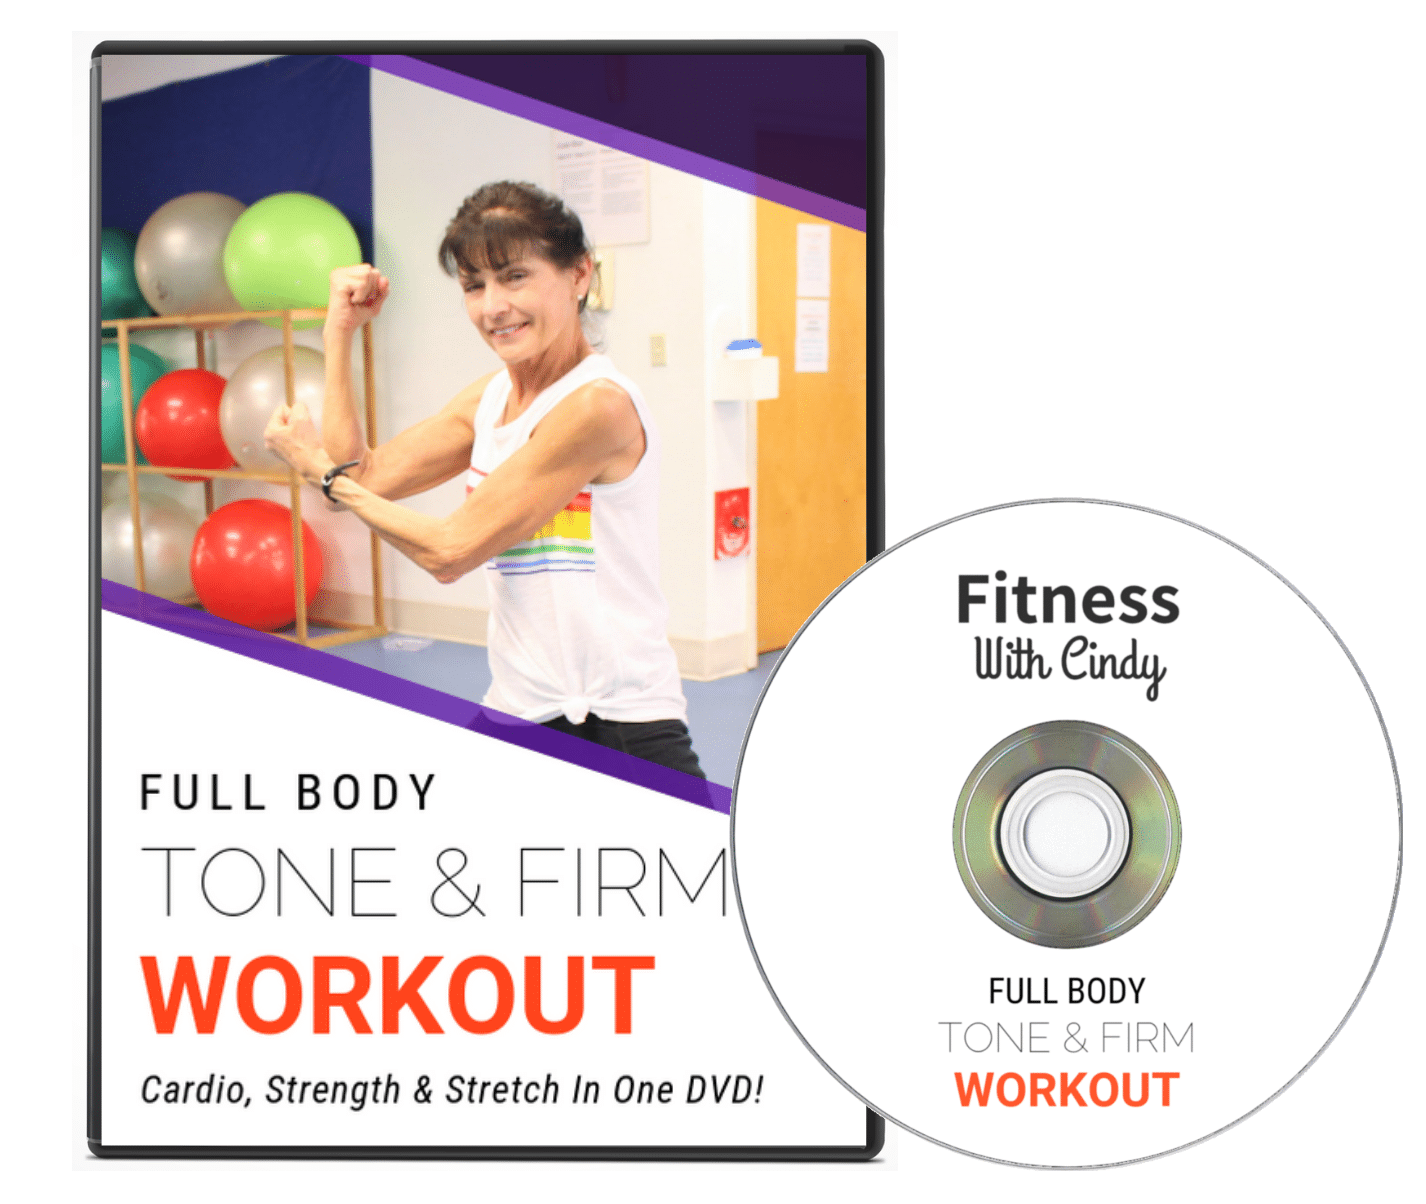 https://www.fitnesswithcindy.com/wp-content/uploads/2019/09/Amazon-product-image.png